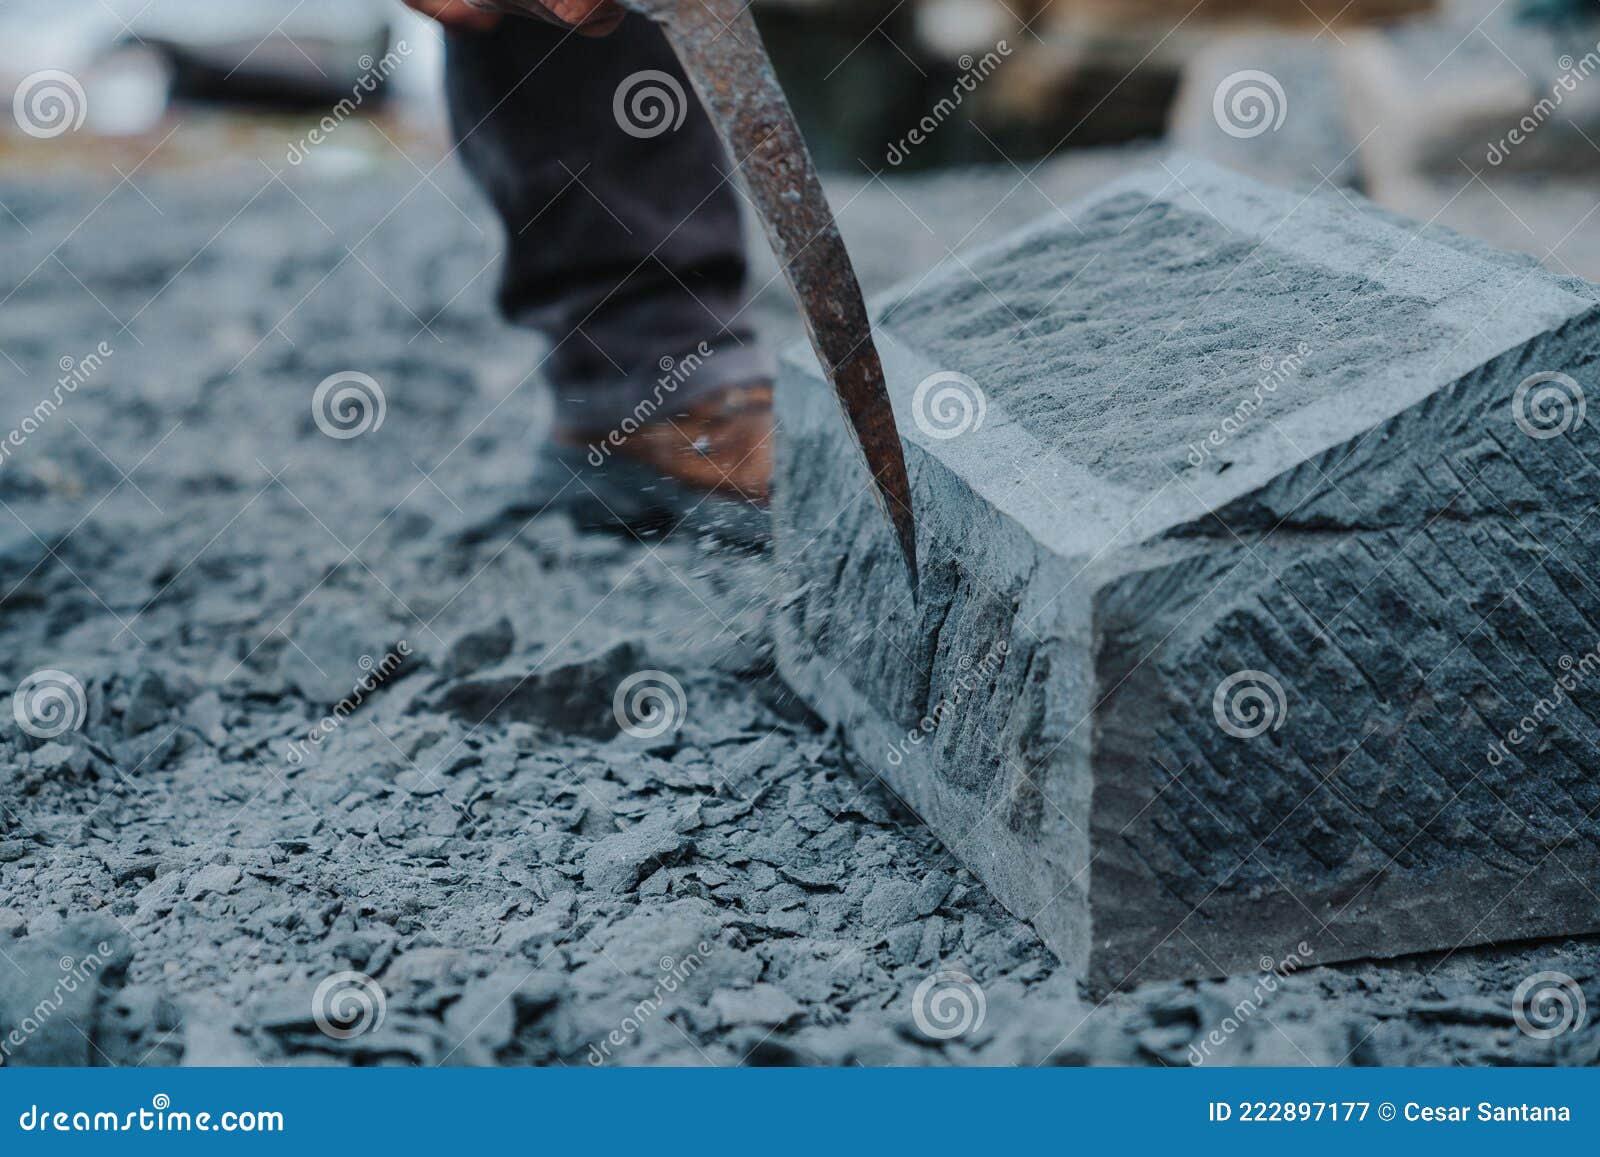 stone craftsman carefully chipping at a block of cancagua stone to  it